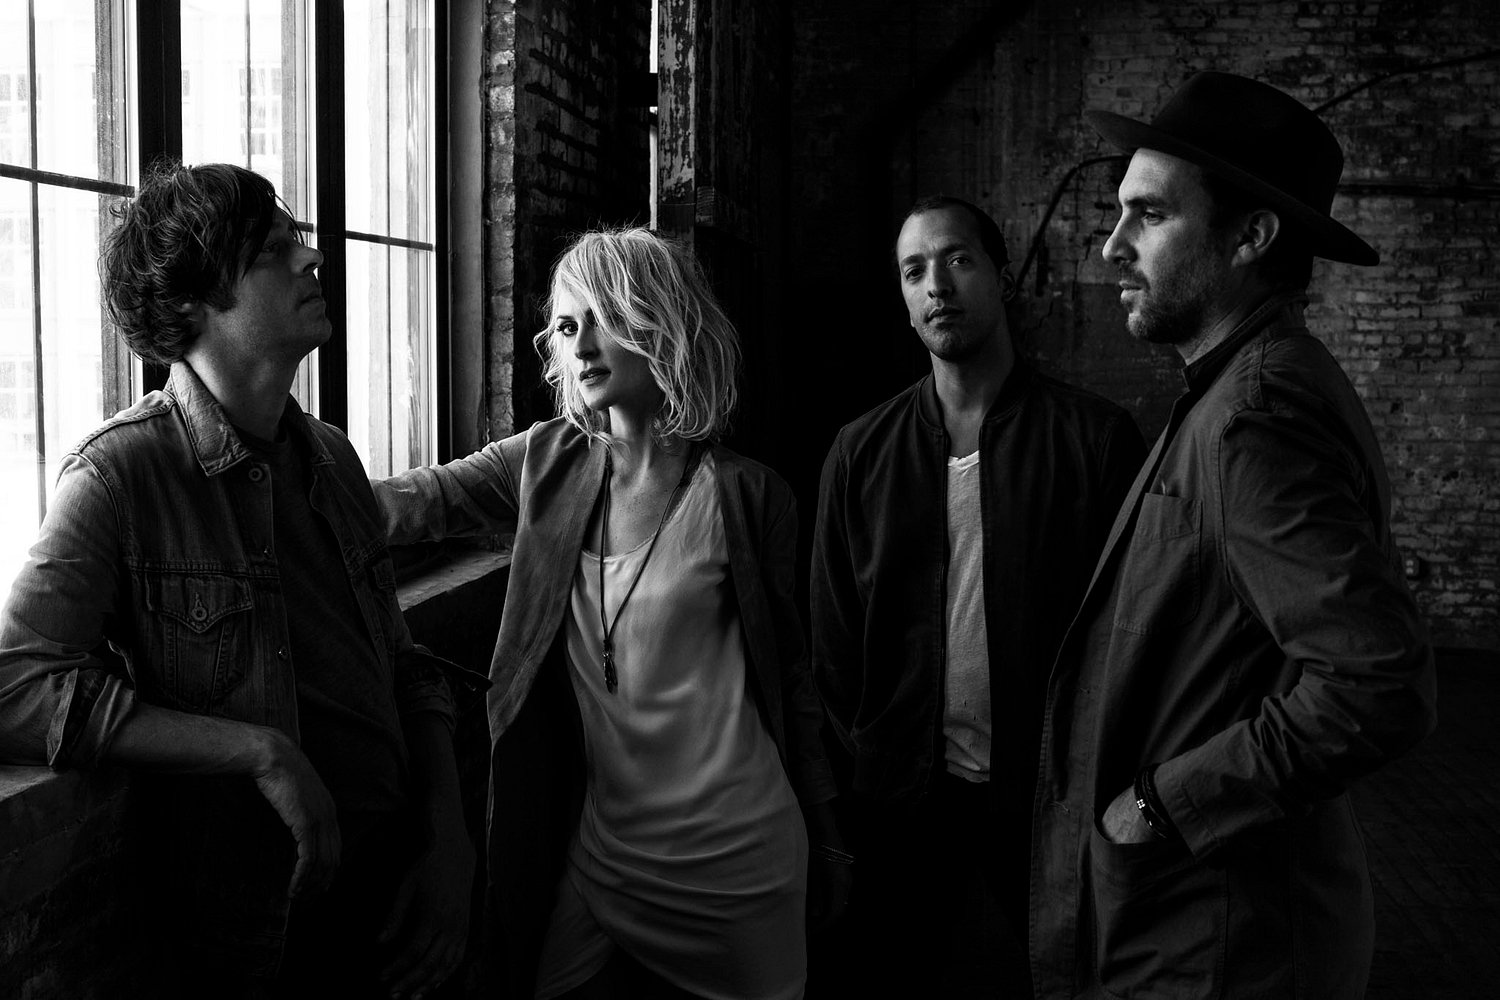 Metric: “In a mainstream world, we’re completely weird"